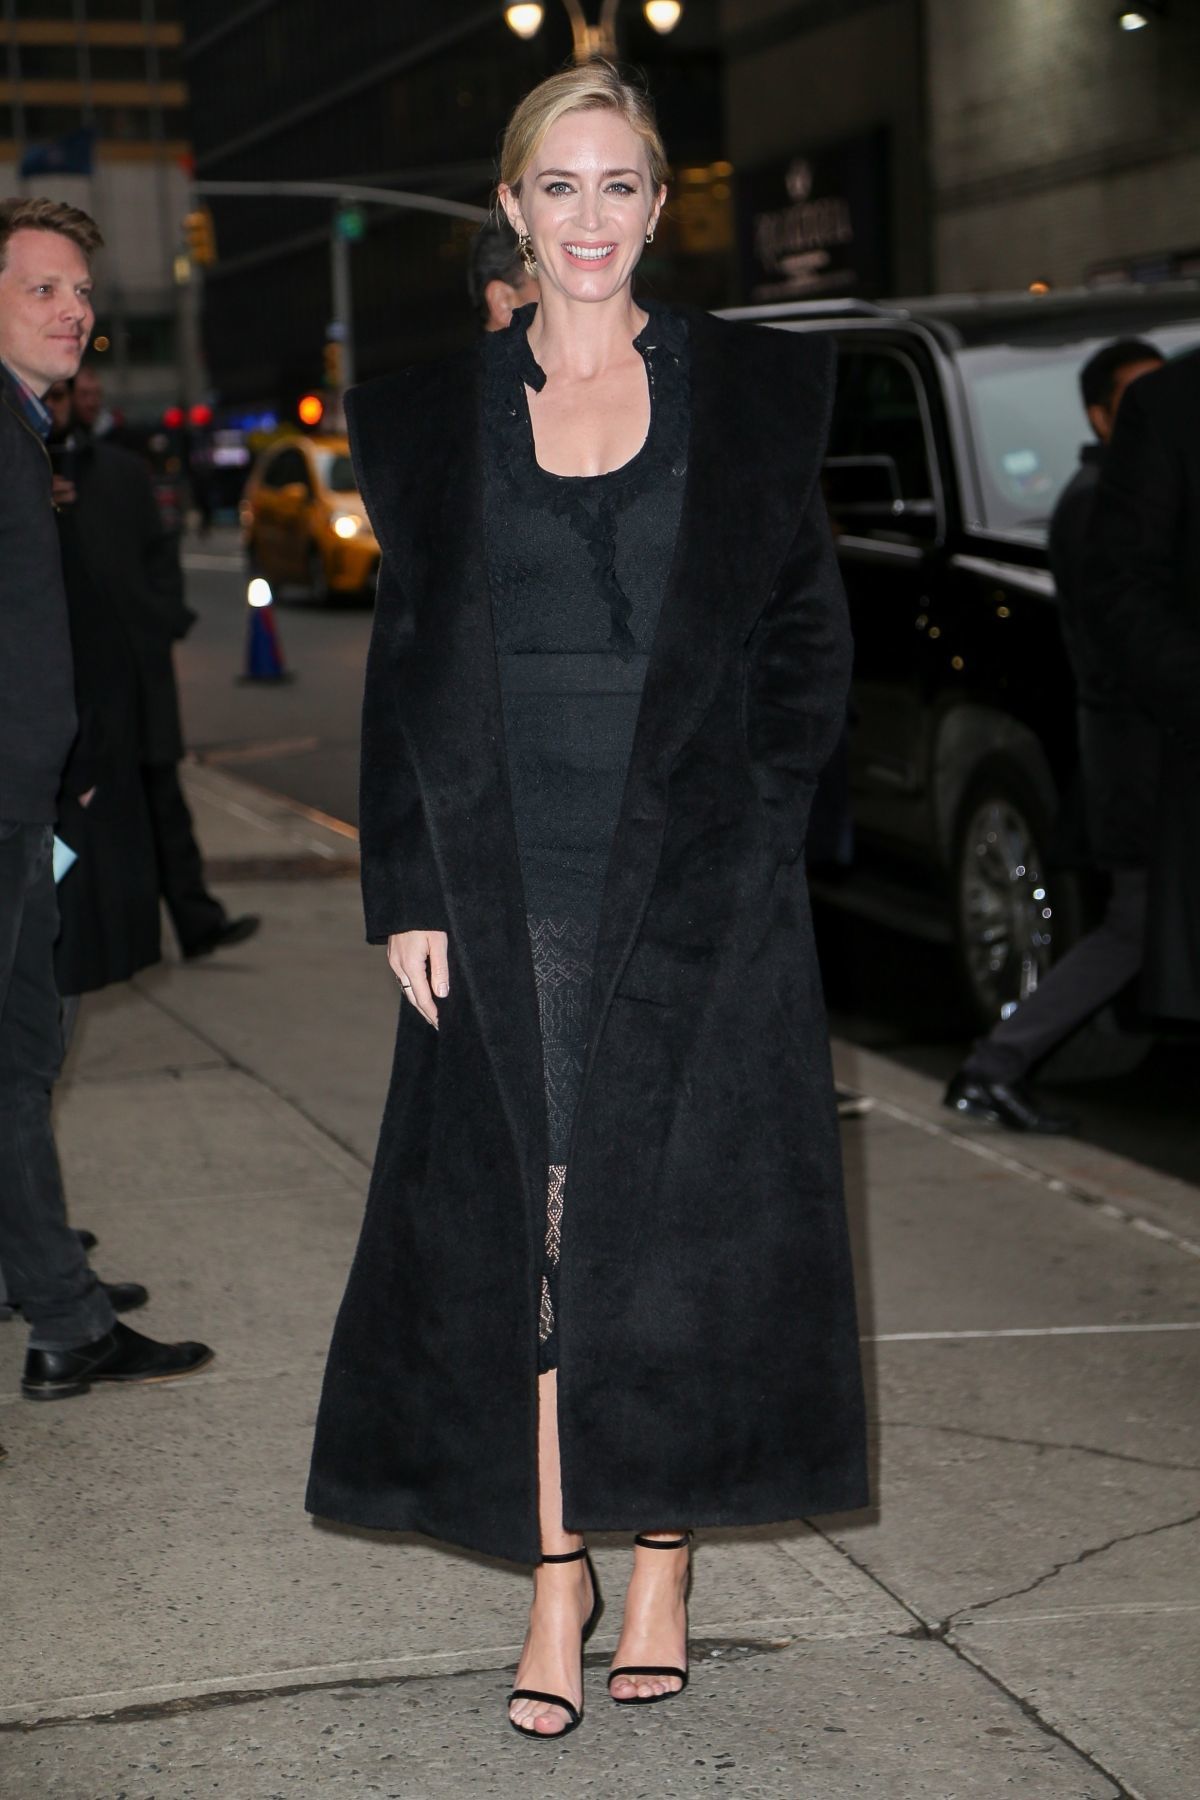 emily-blunt-arriving-at-the-late-show-with-stephen-colbert-in-nyc-32918-10.jpeg